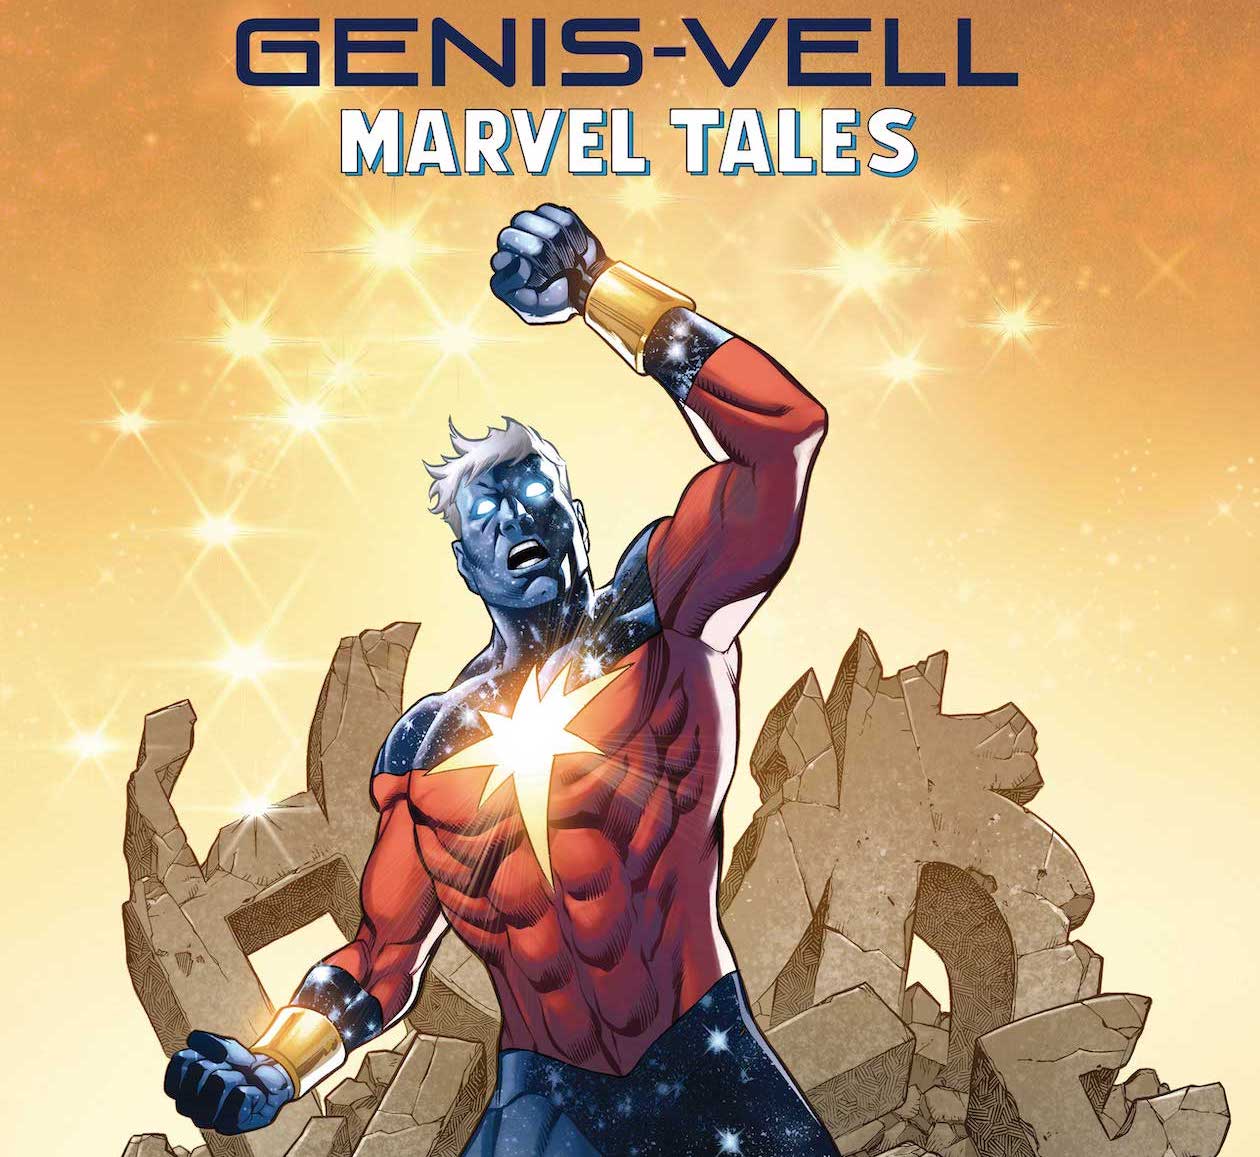 Marvel teases 'Genis-Vell: Marvel Tales' #1 out this November